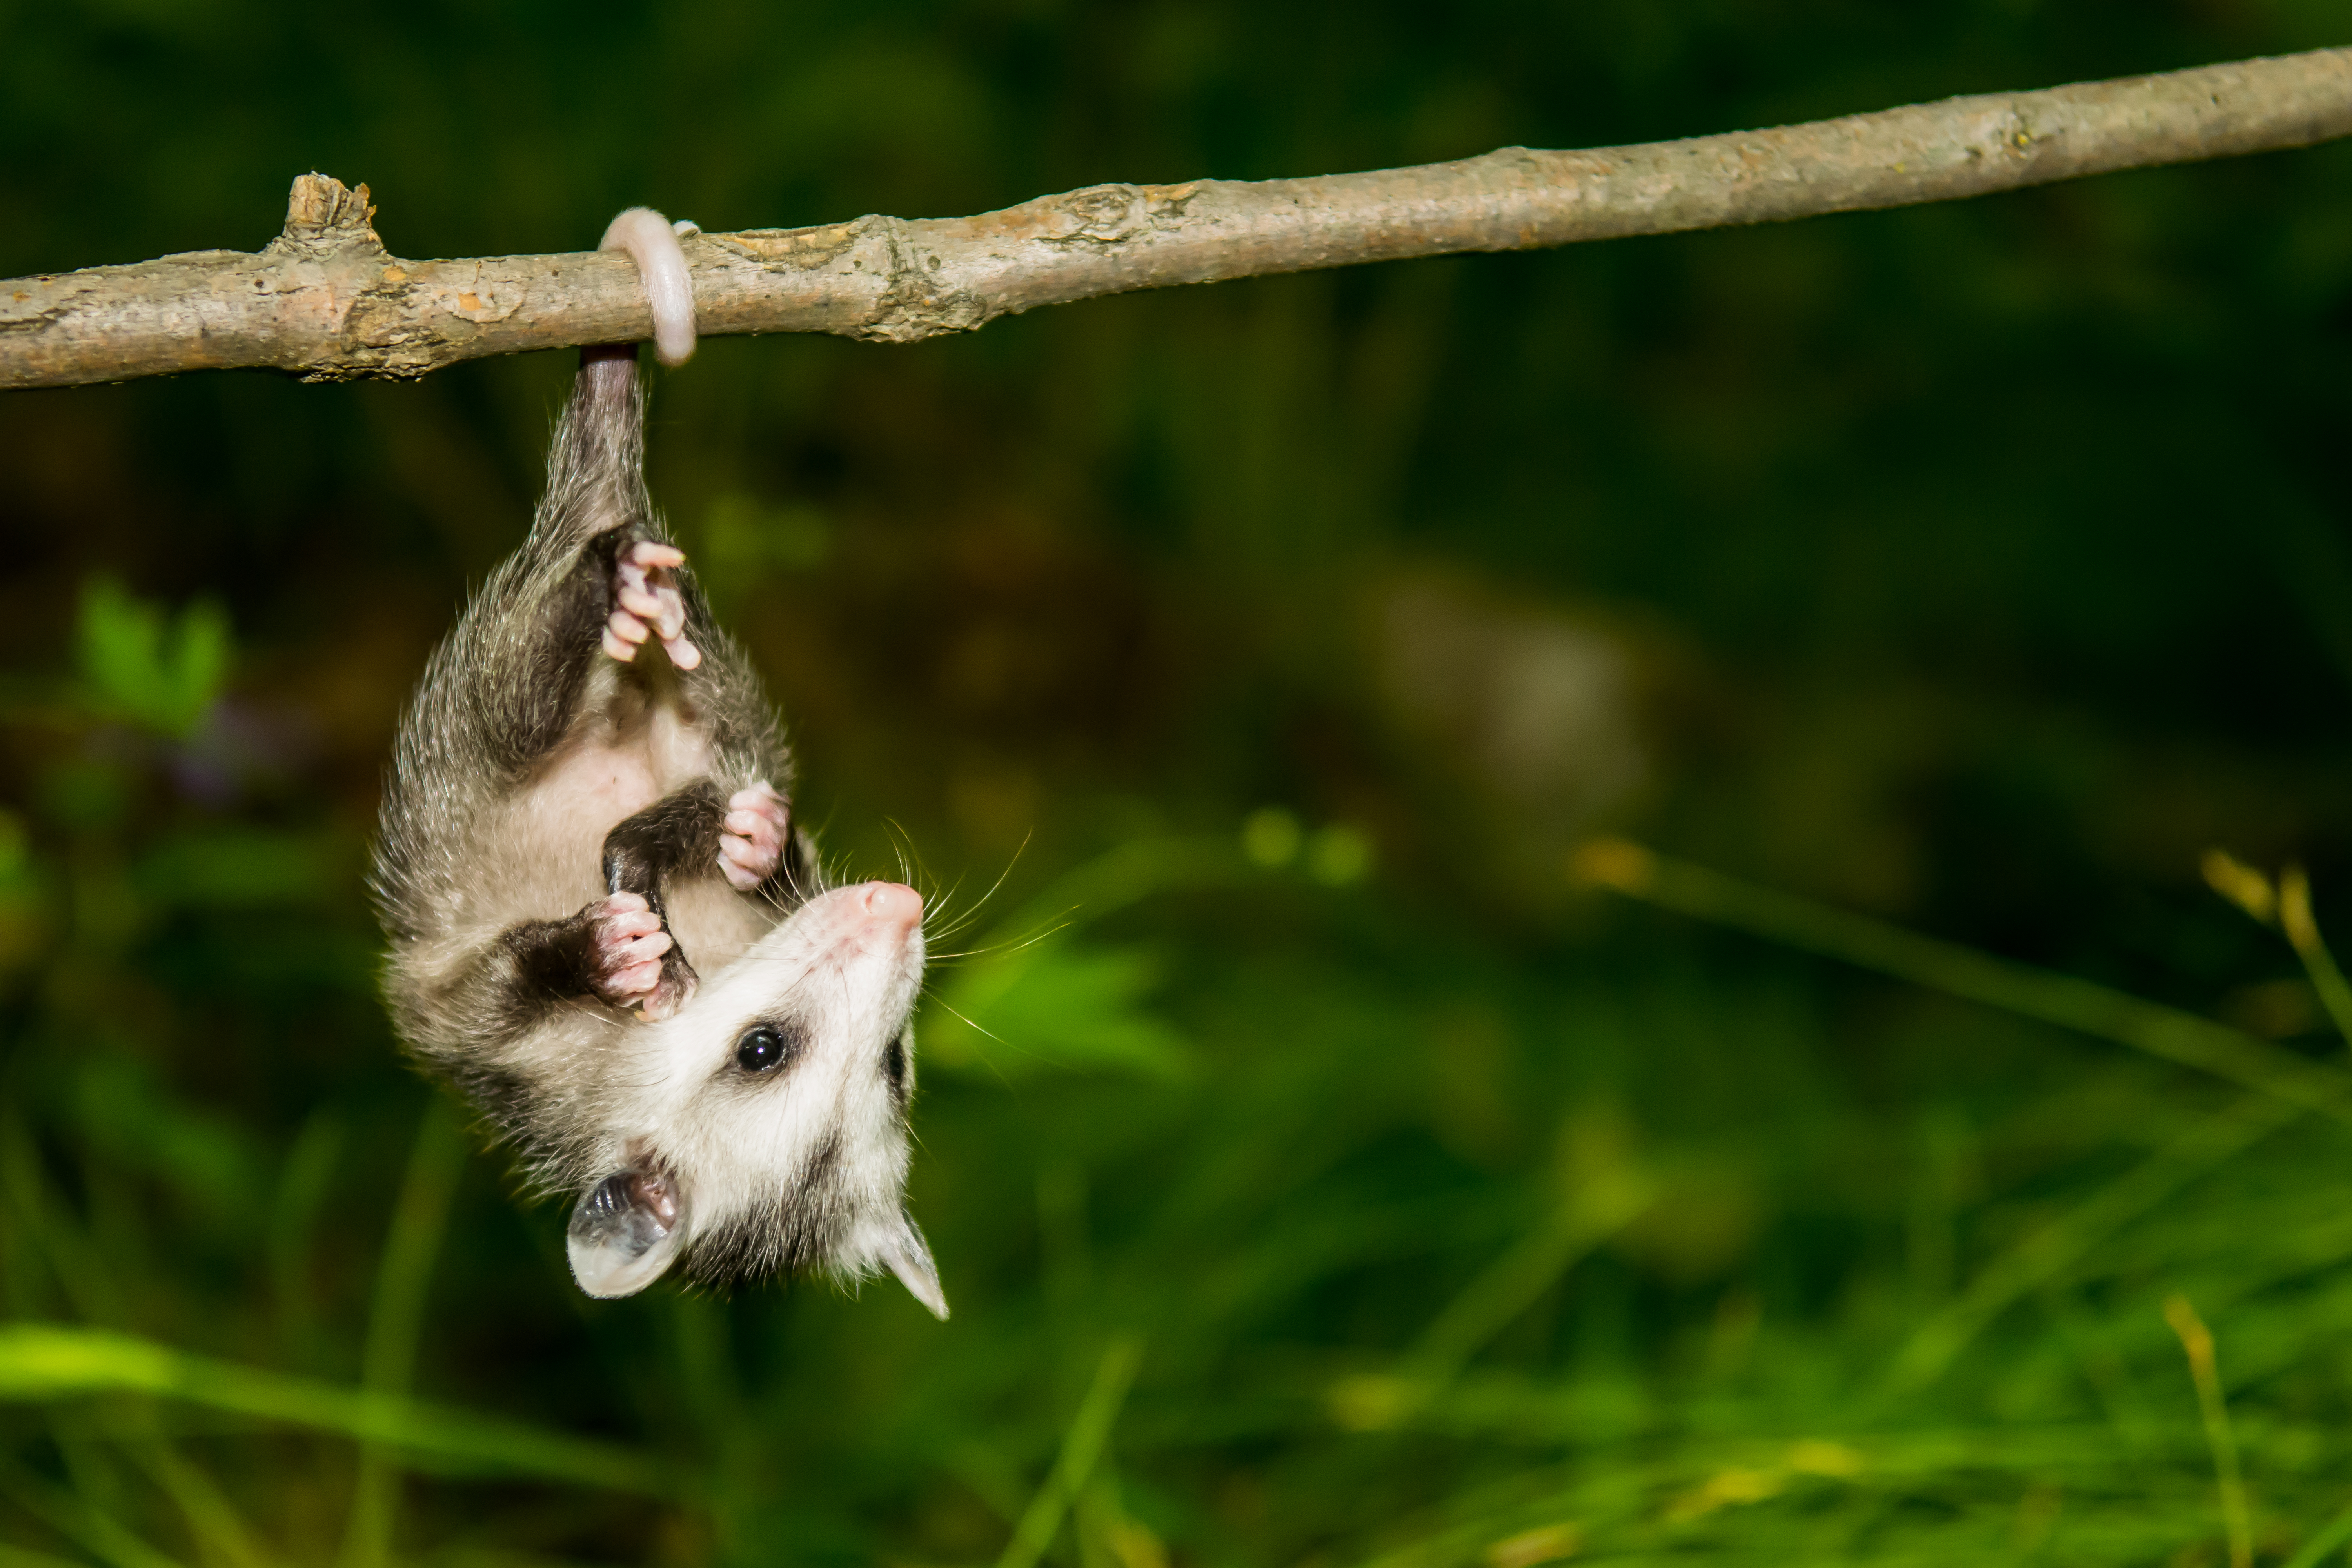 young opossum hanging from a tree branch